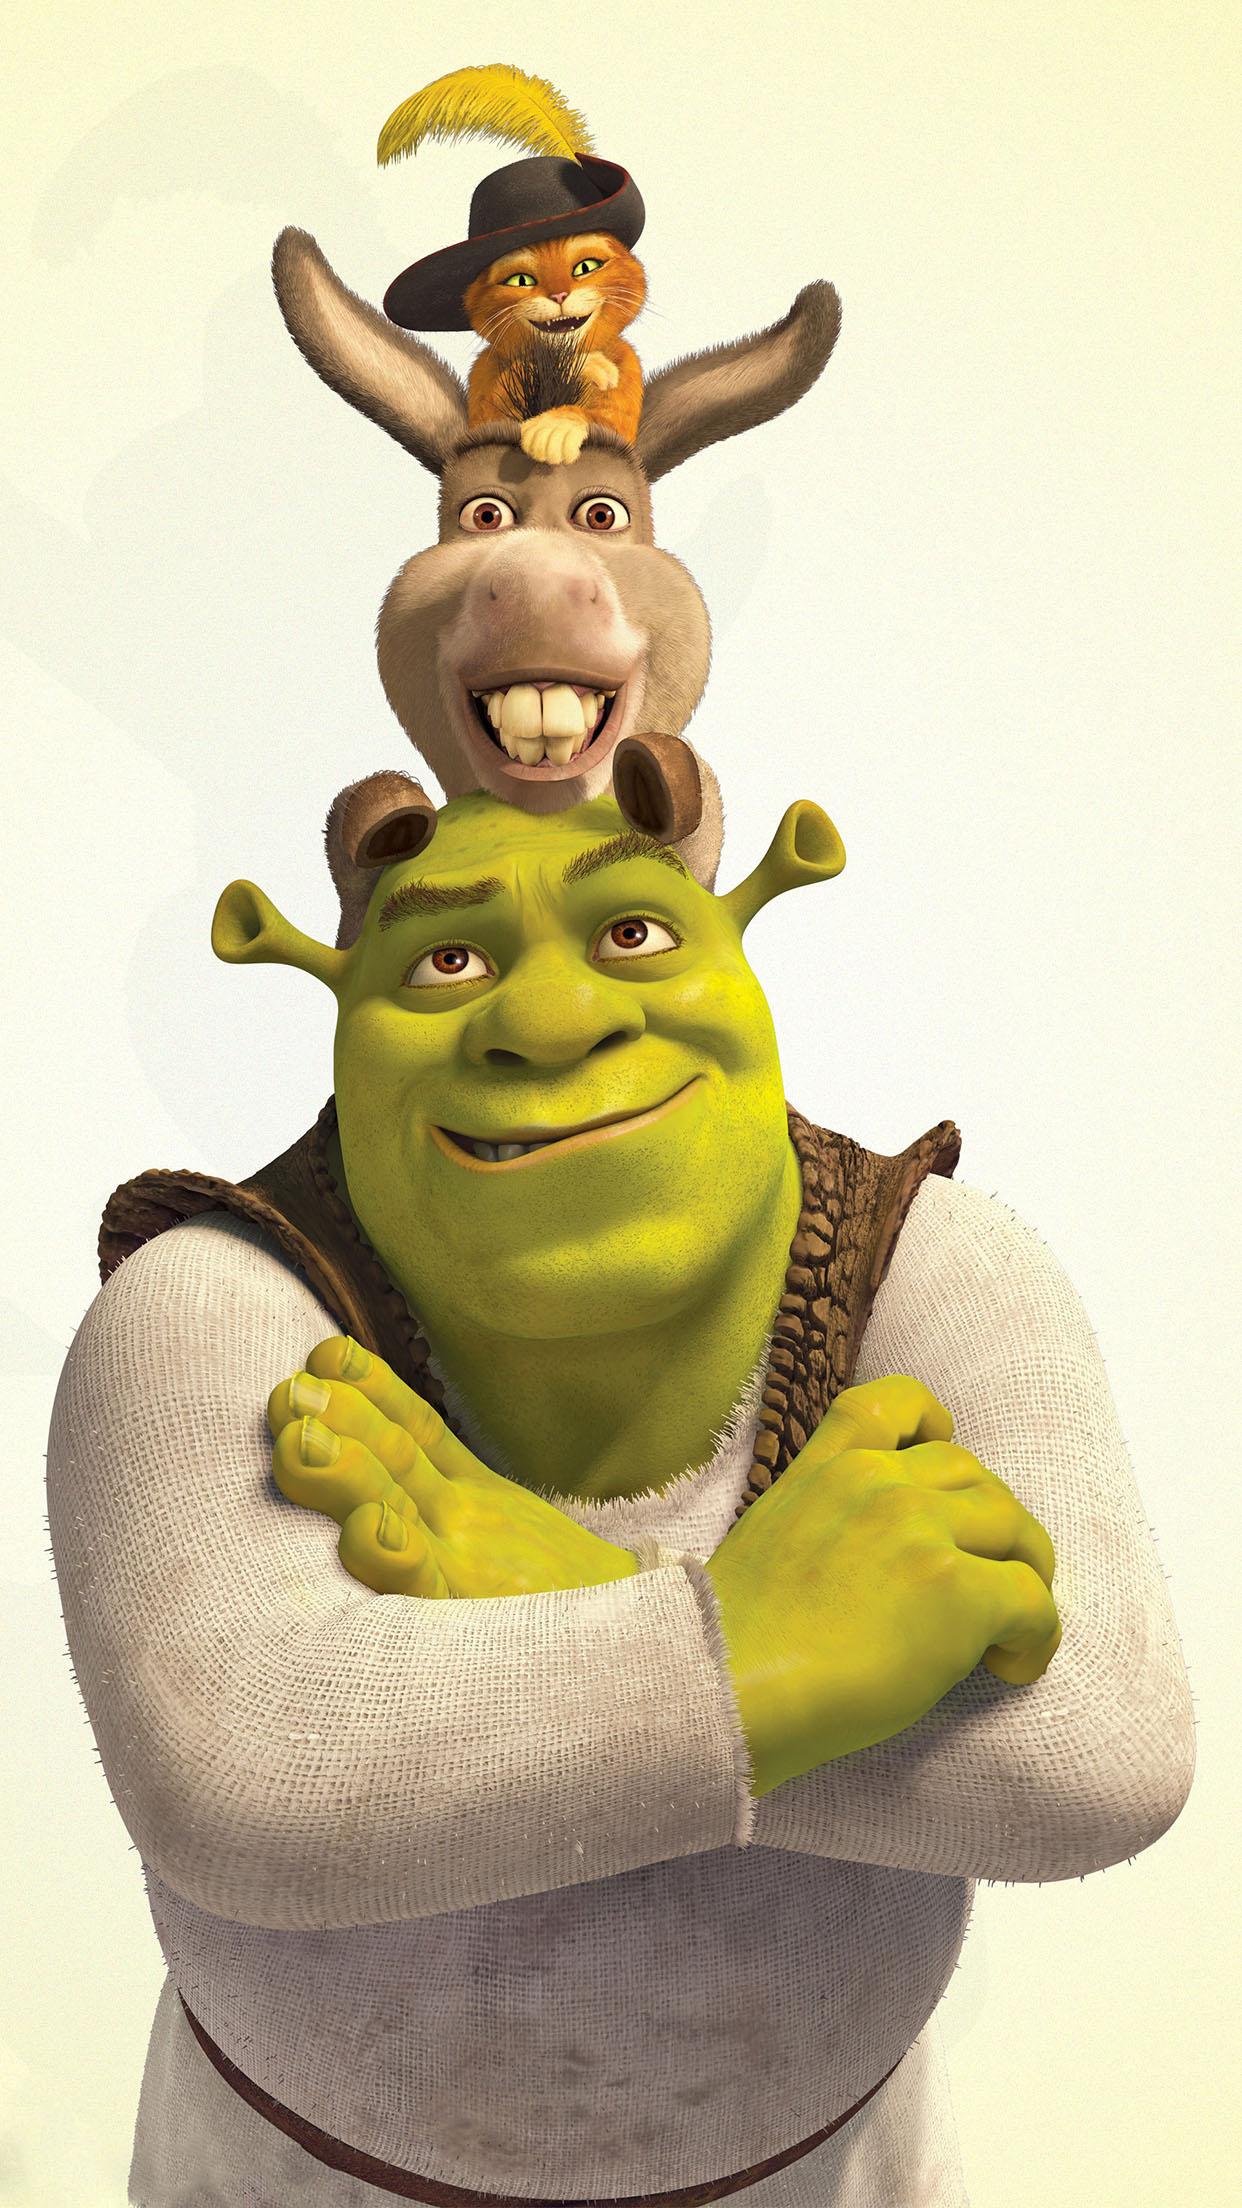 Shrek donkey and puss in boots Wallpaper for iPhone X, 7